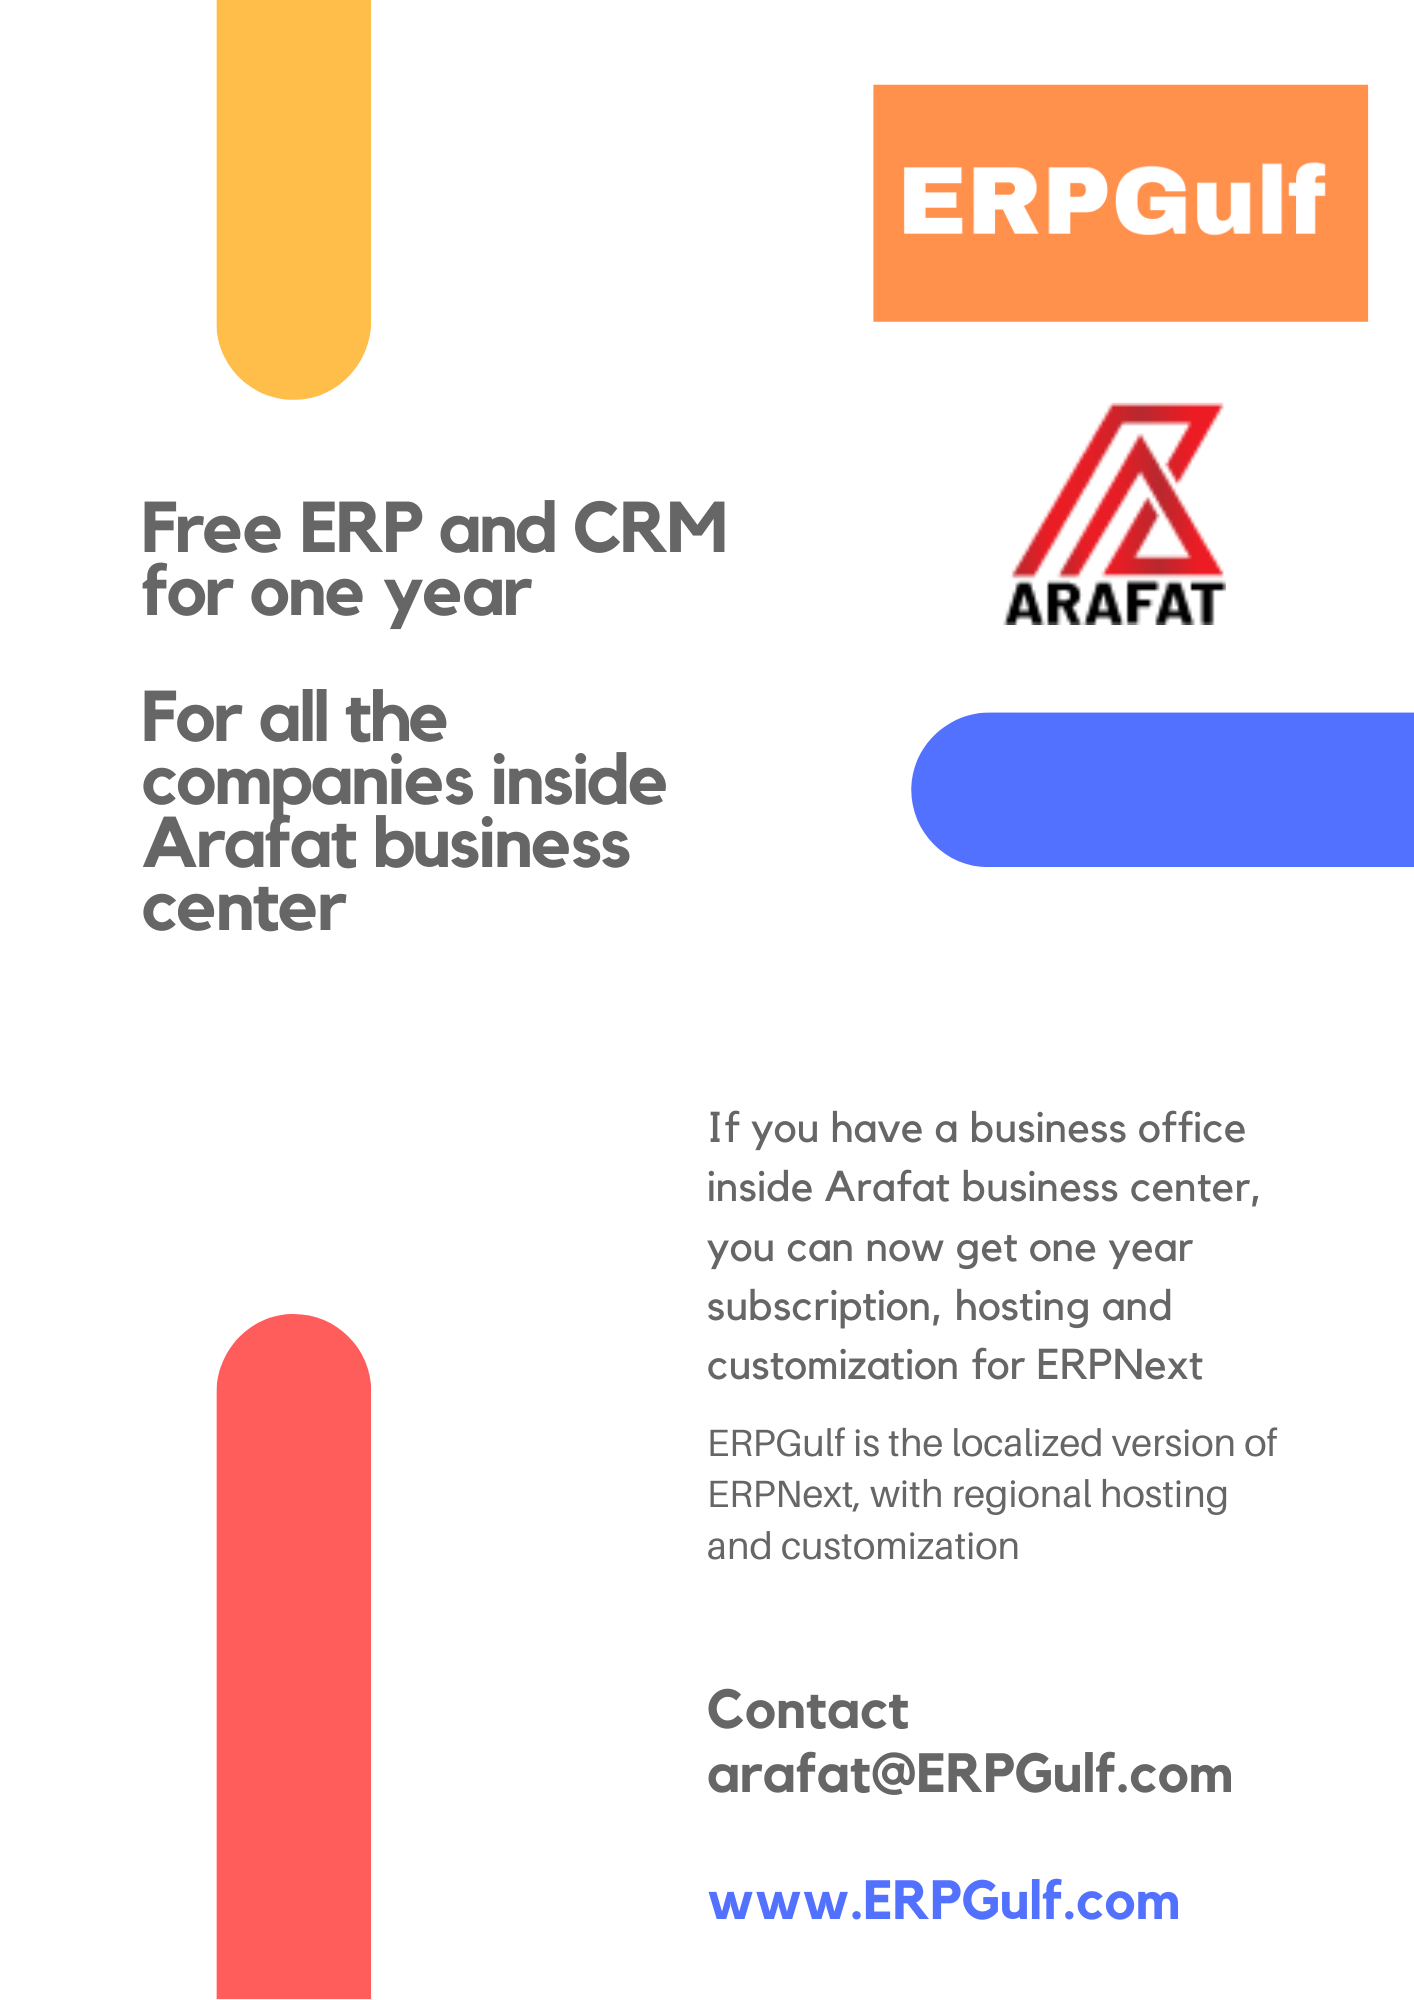 Arafat business center offer ERPGulf for all businesses it's premise - Cover Image